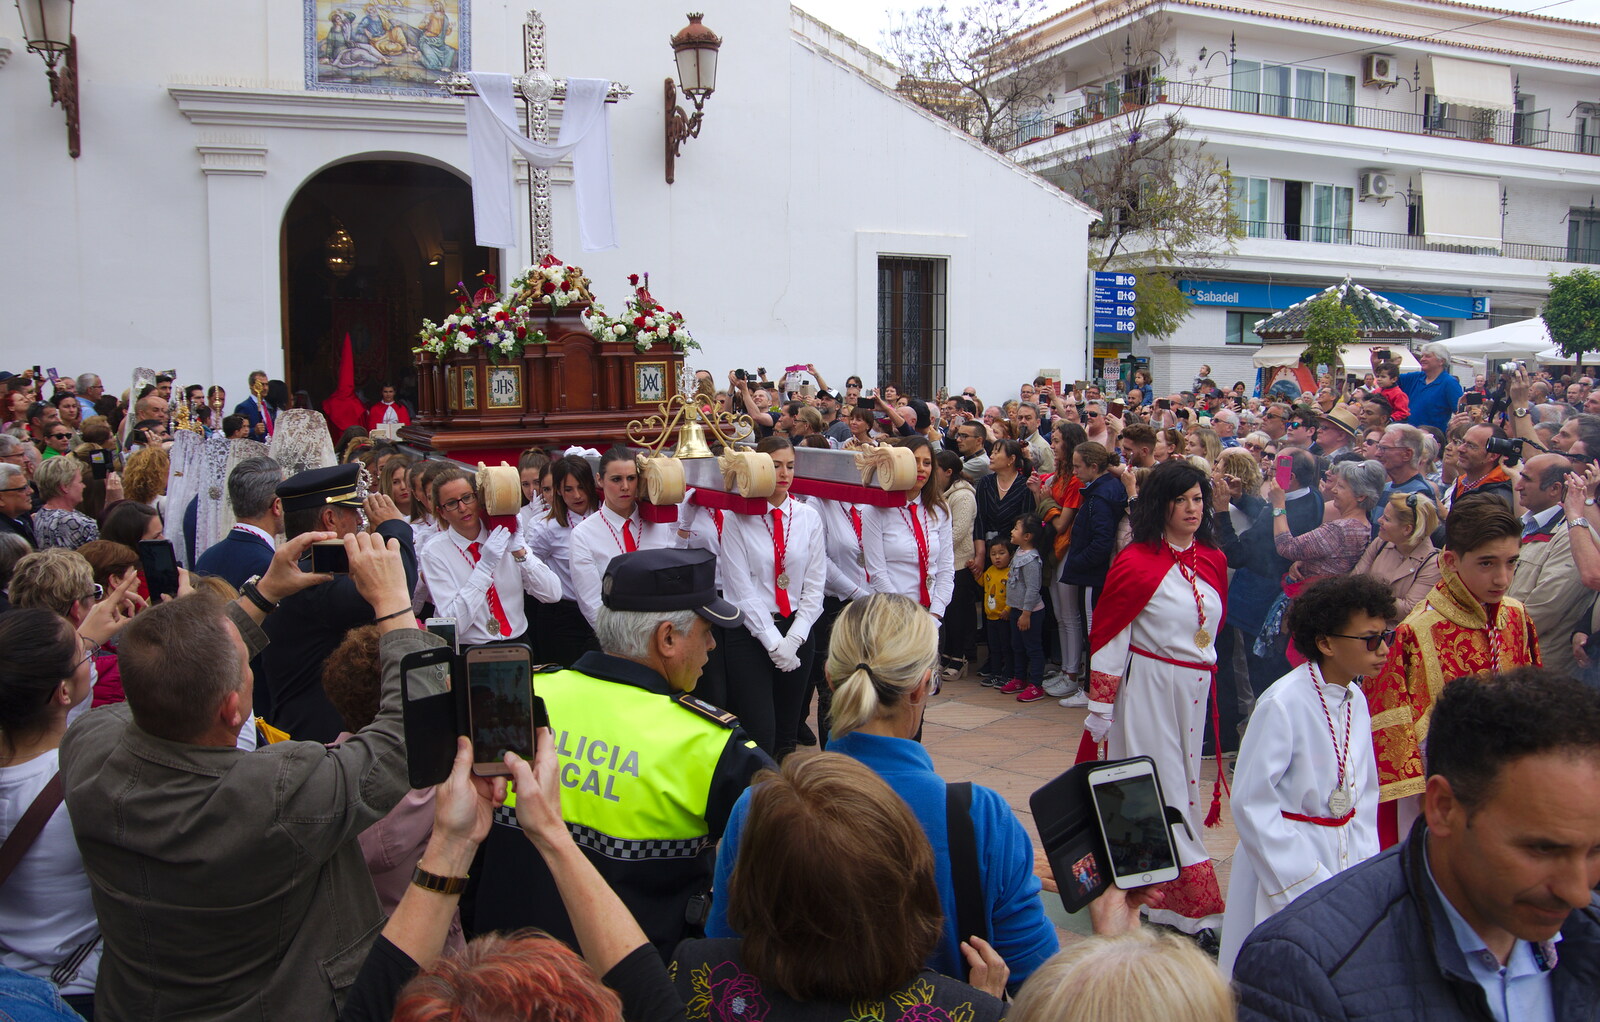 The first of the heavy floats is carried out from An Easter Parade, Nerja, Andalusia, Spain - 21st April 2019